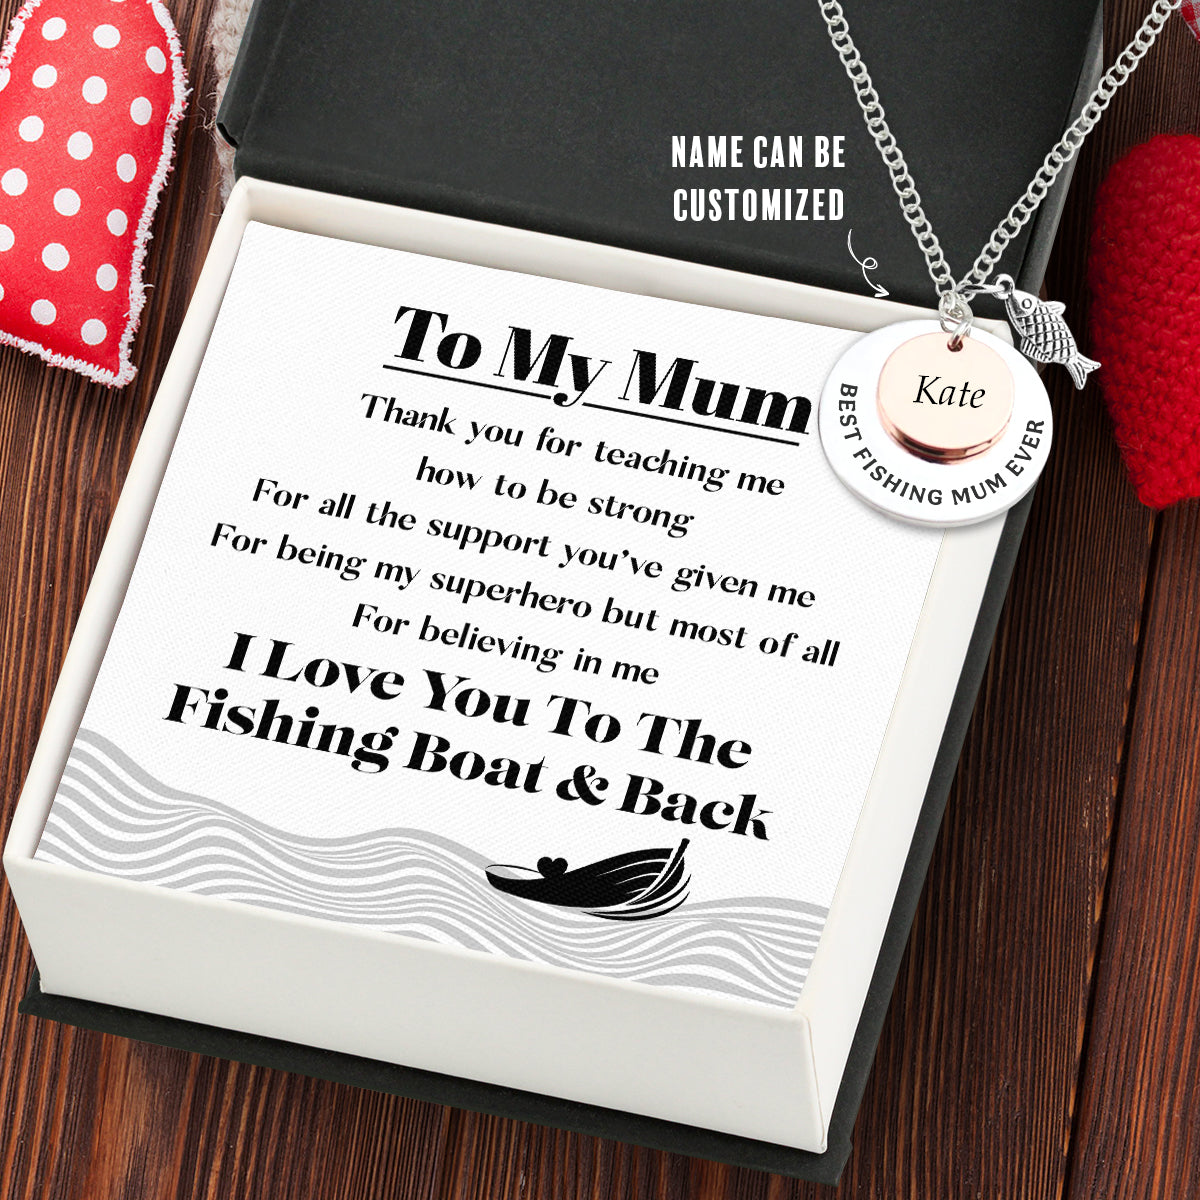 Personalised Fishing Double Round Pendants Necklace - Fishing - To My Mum - I Love You To The Fishing Boat & Back - Ukgngb19002